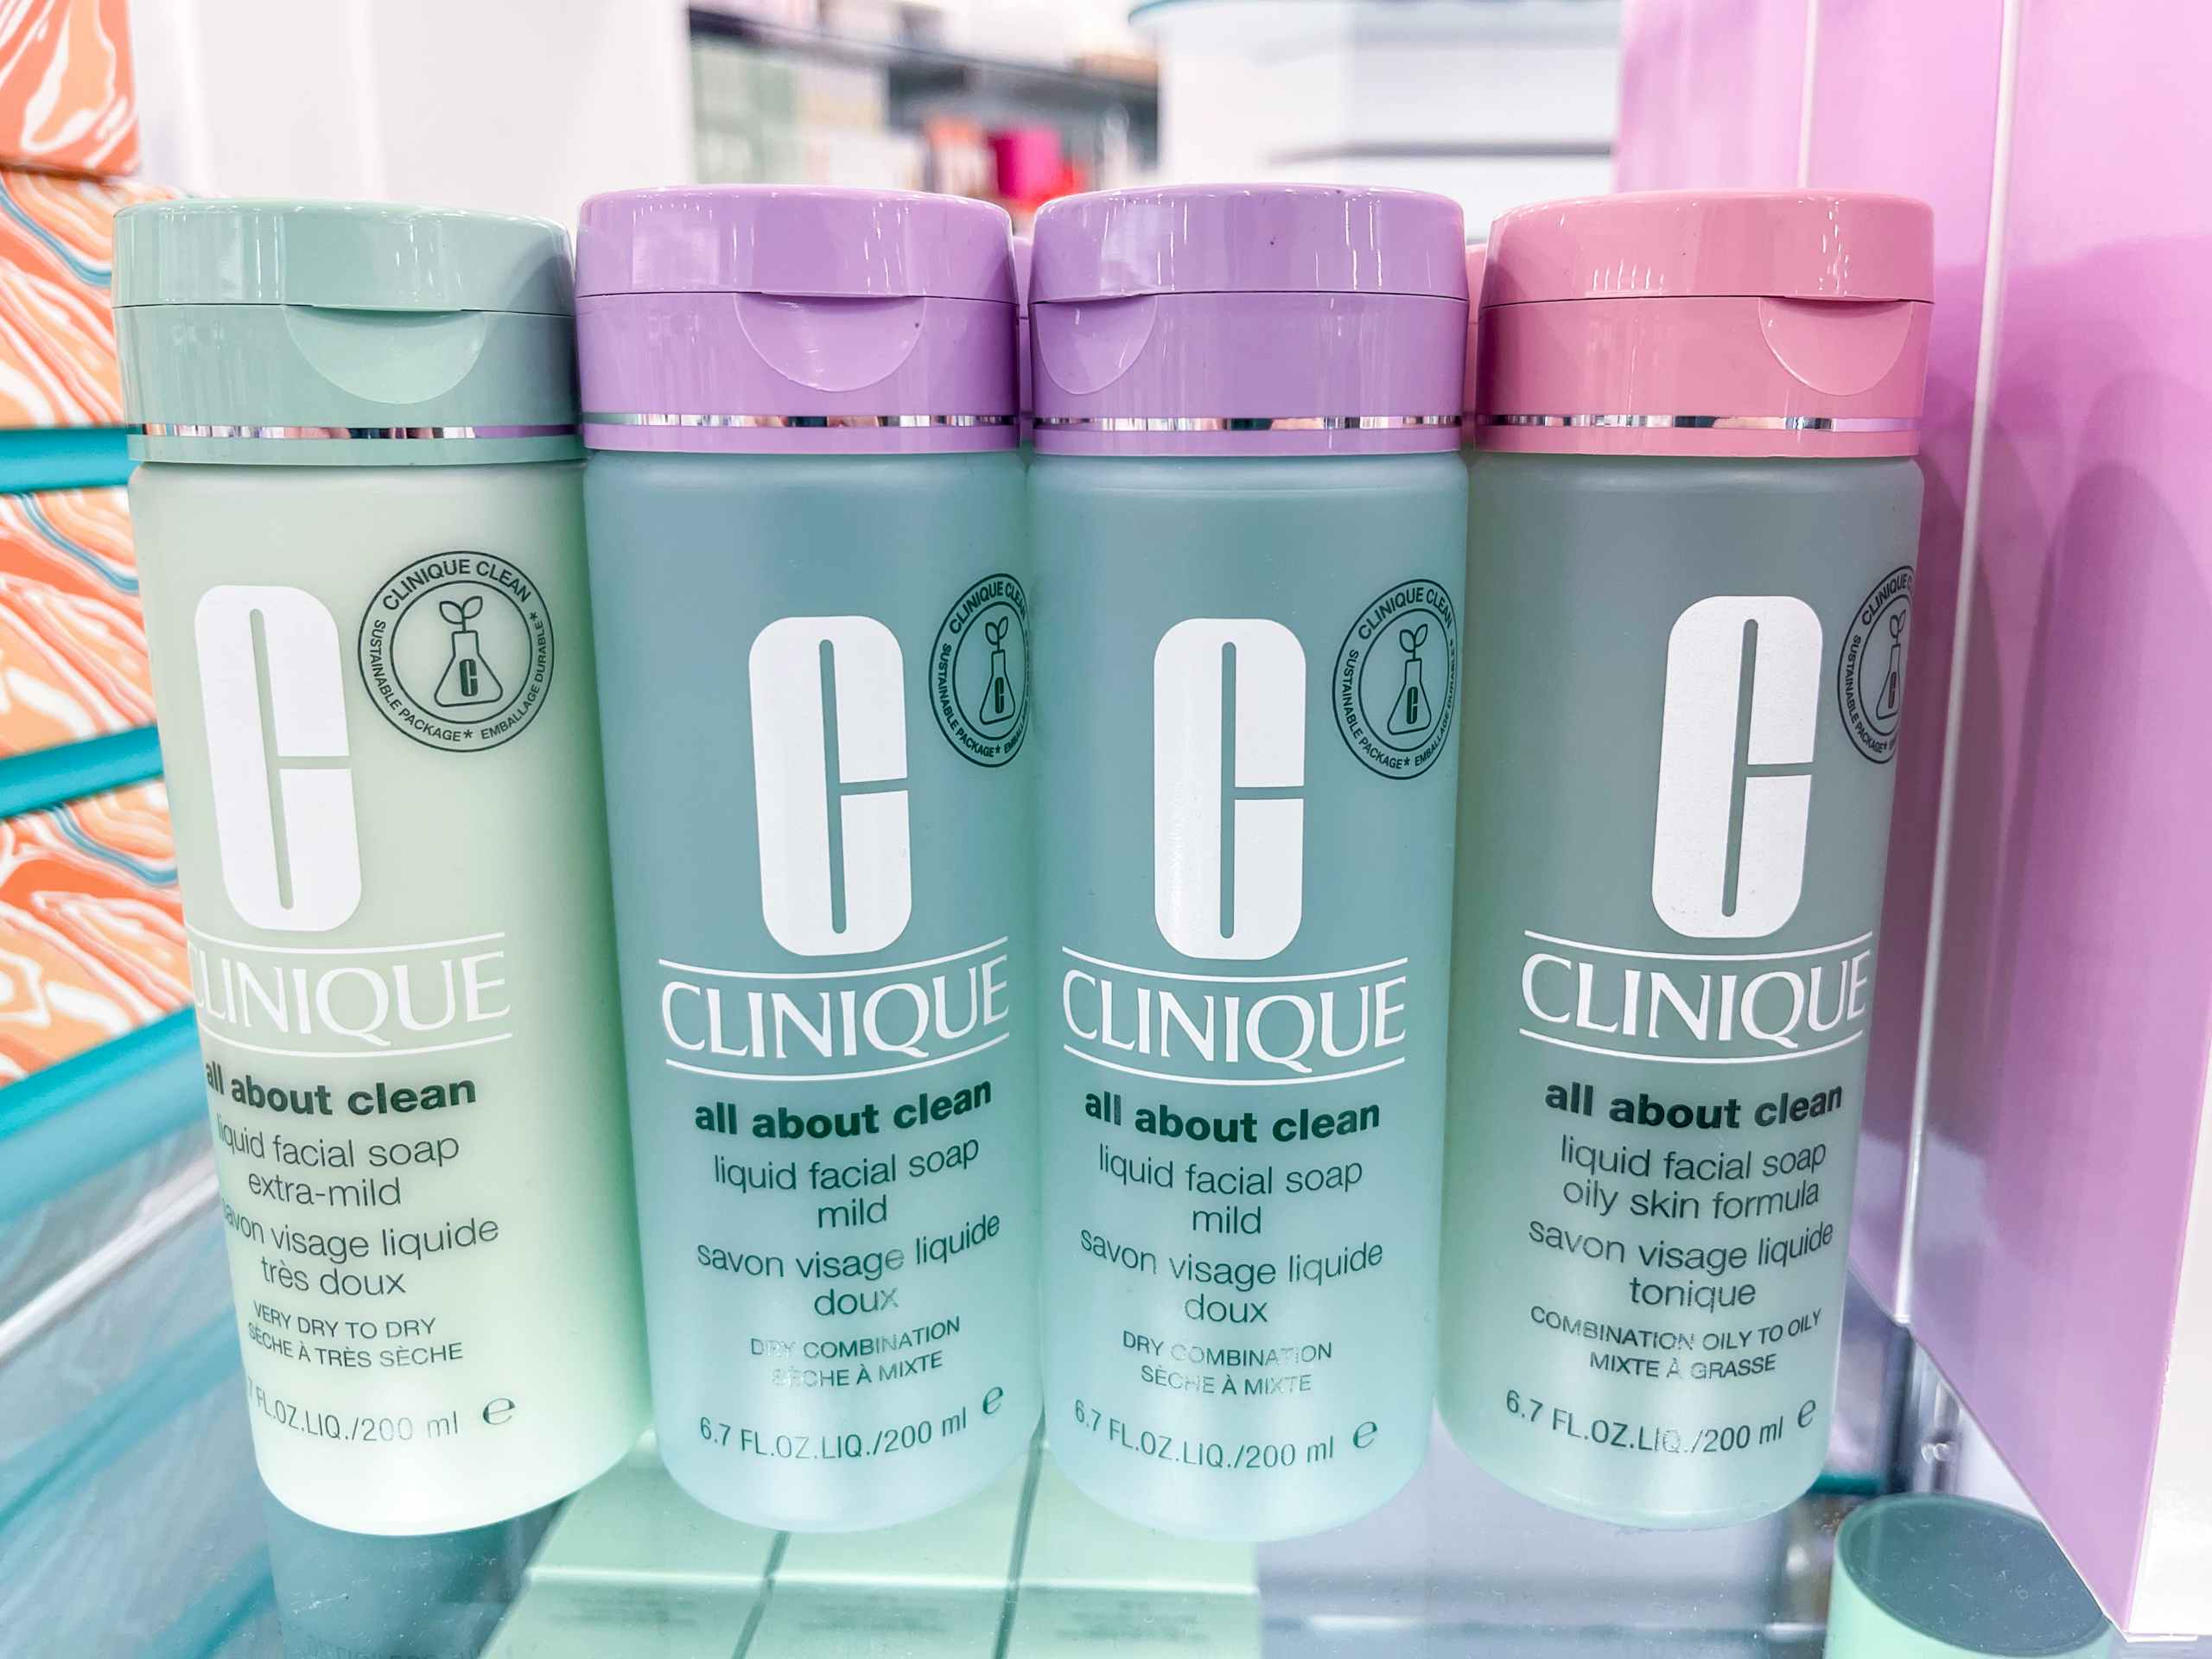 Clinique skin care at Macy's